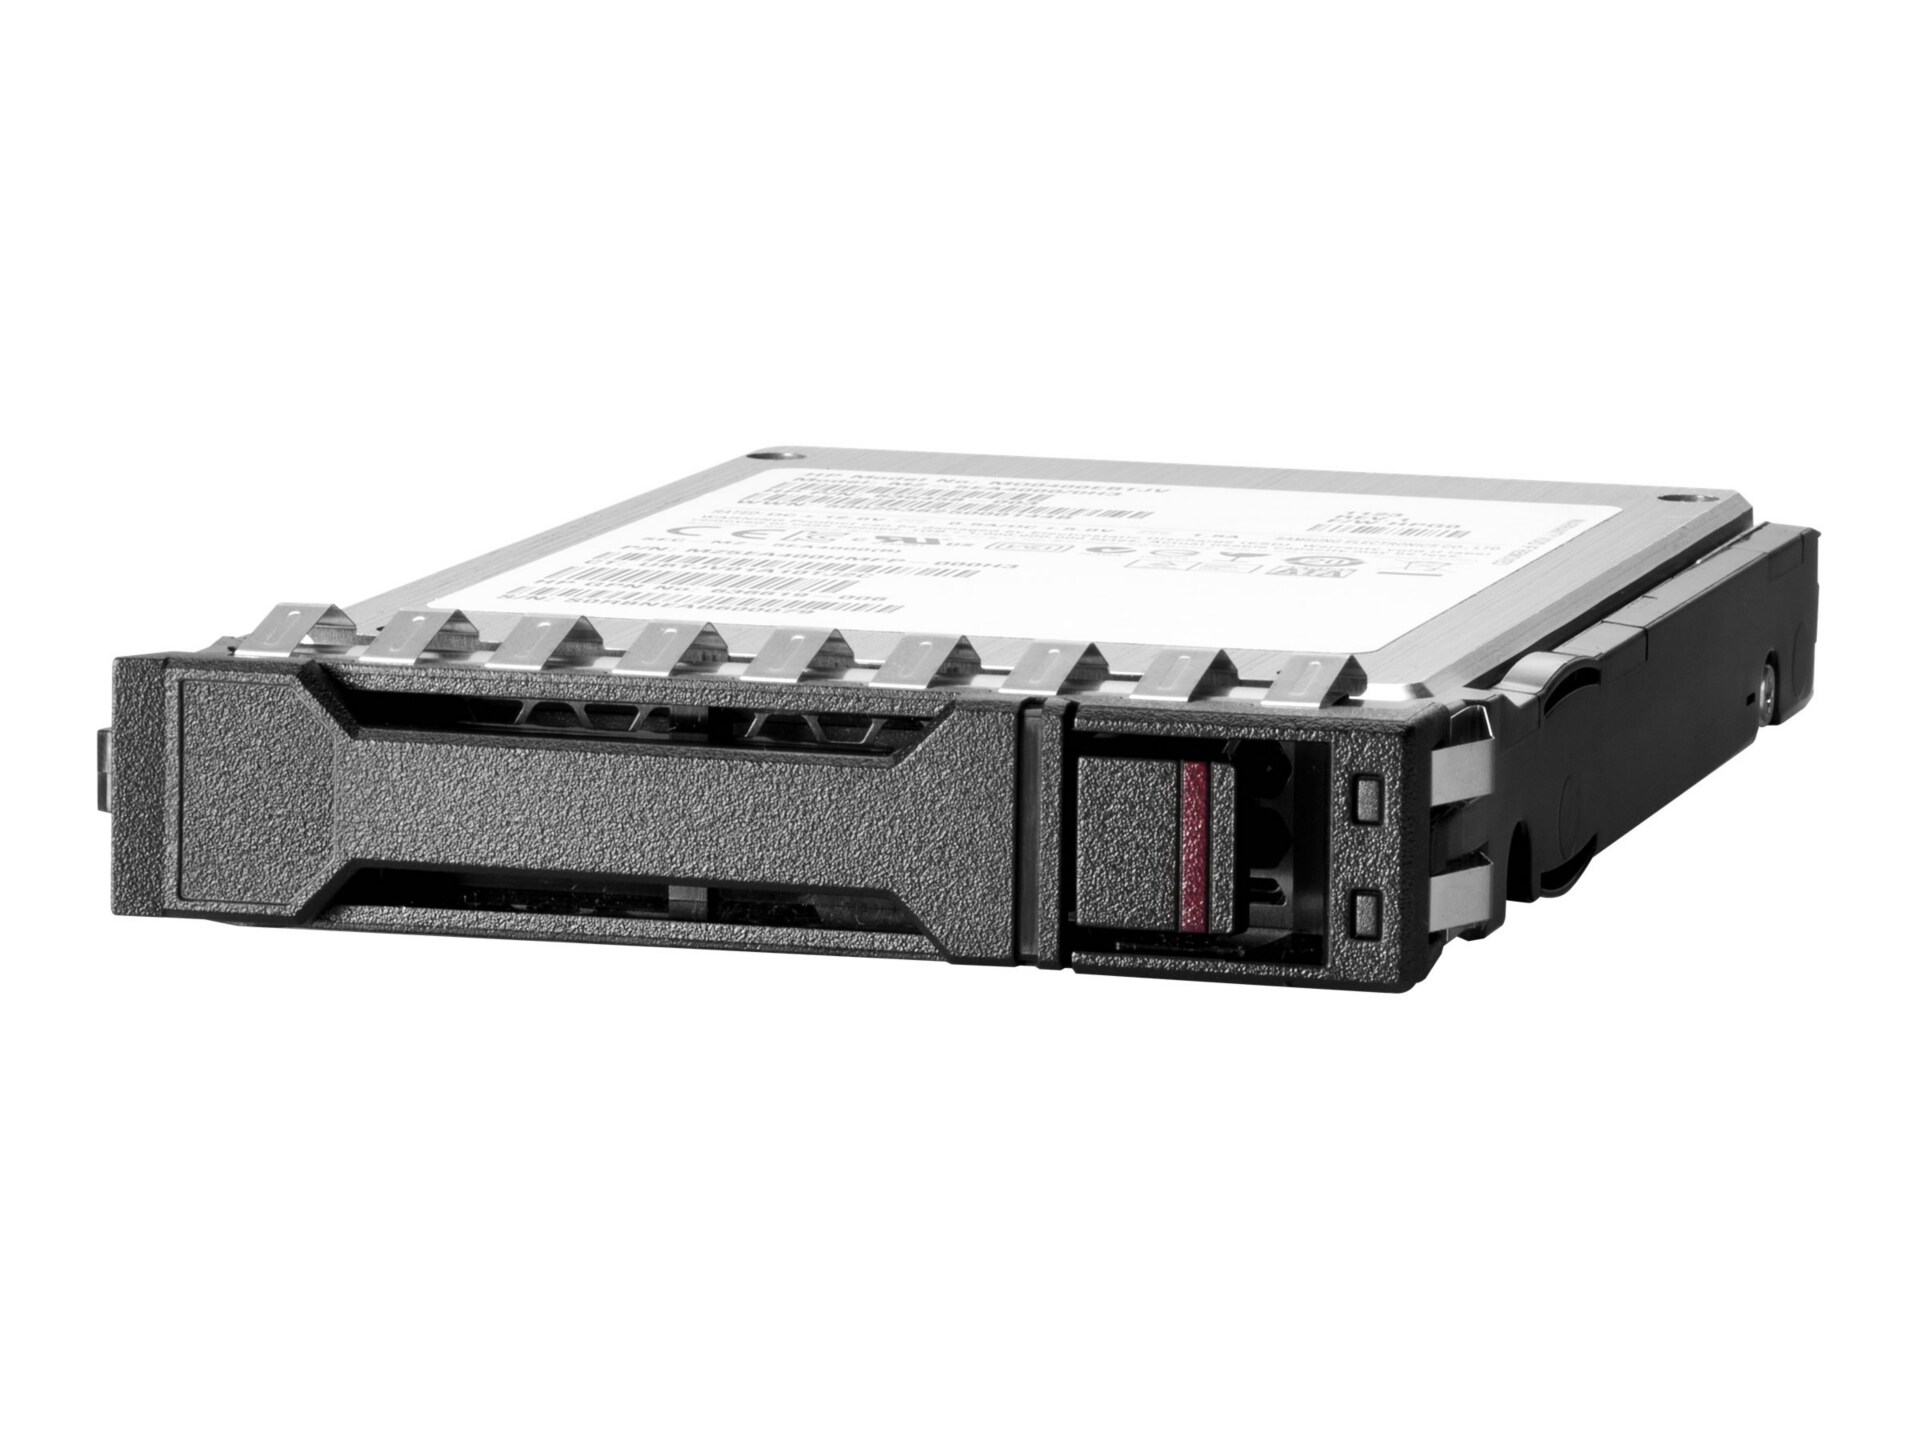 HPE CM6 - SSD - Mixed Use, High Performance - 1.6 TB - U.3 PCIe 4.0 (NVMe) - factory integrated